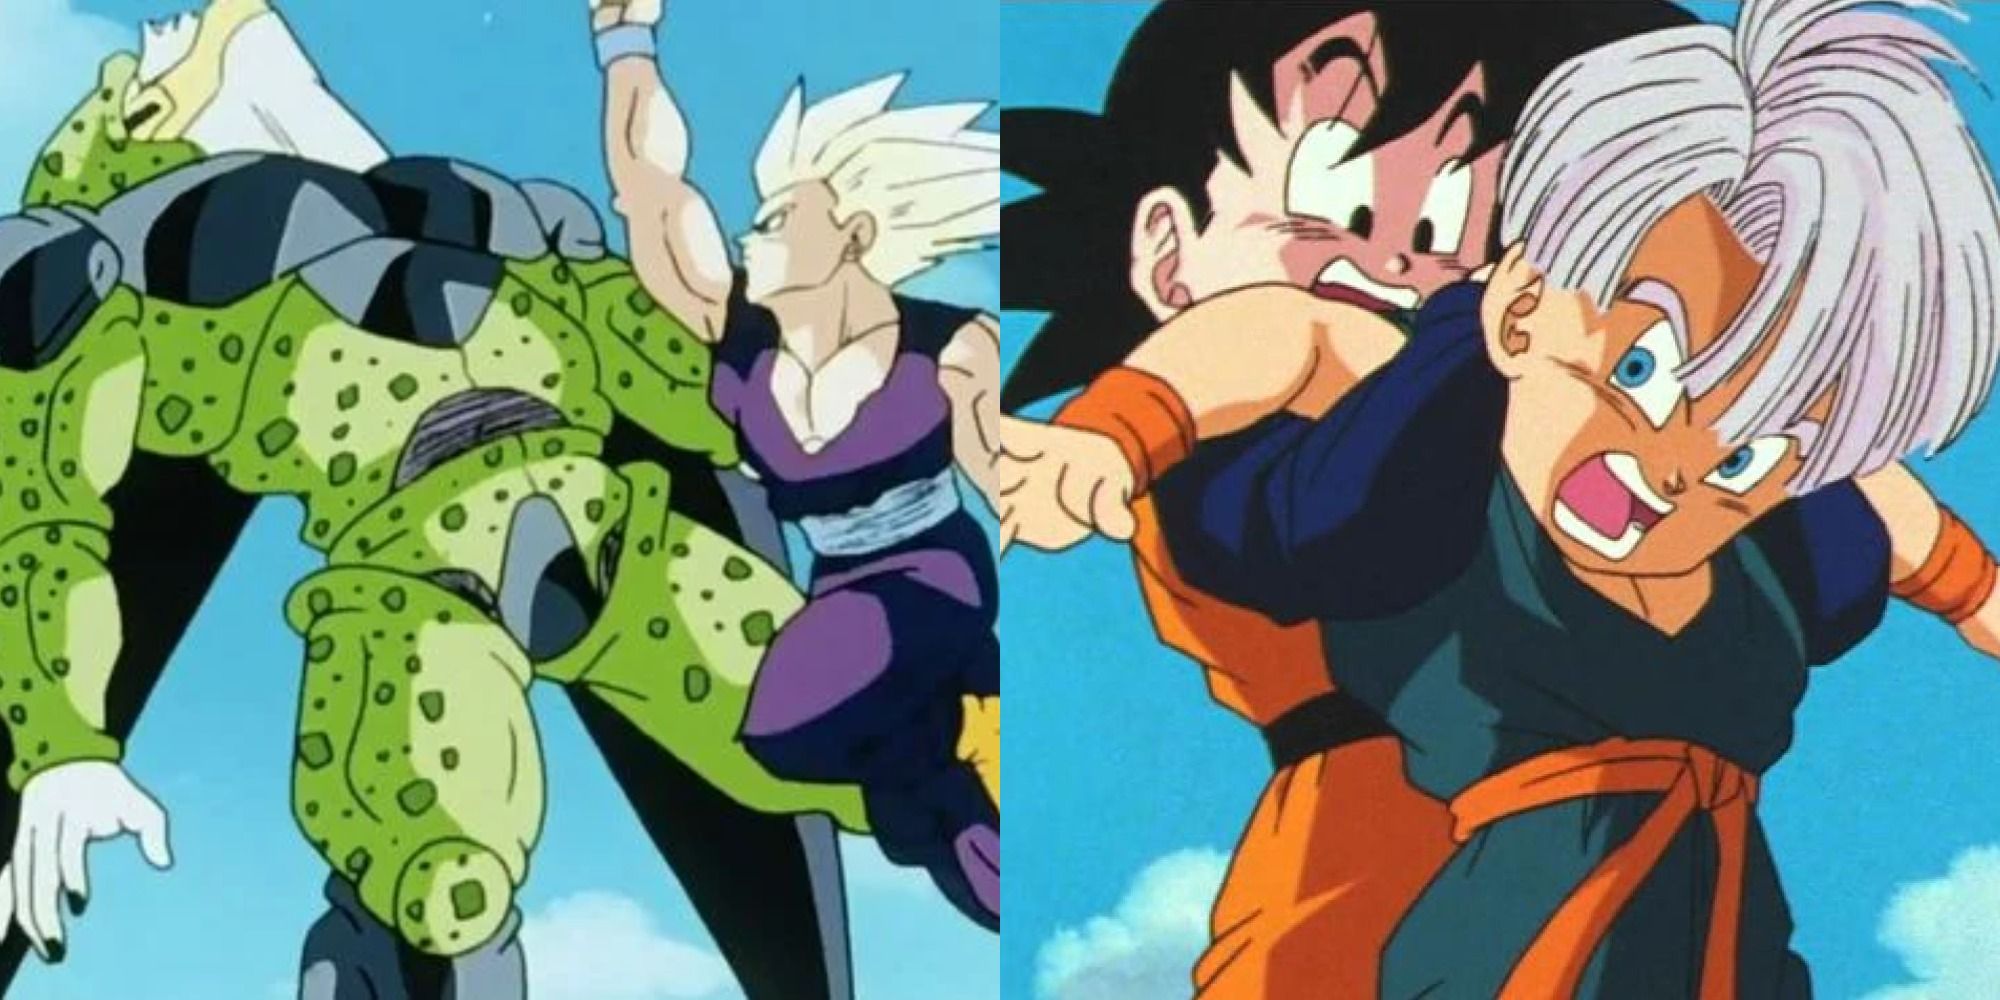 Gohan fighting Cell and Goten fighting Trunks in Dragon Ball Z.